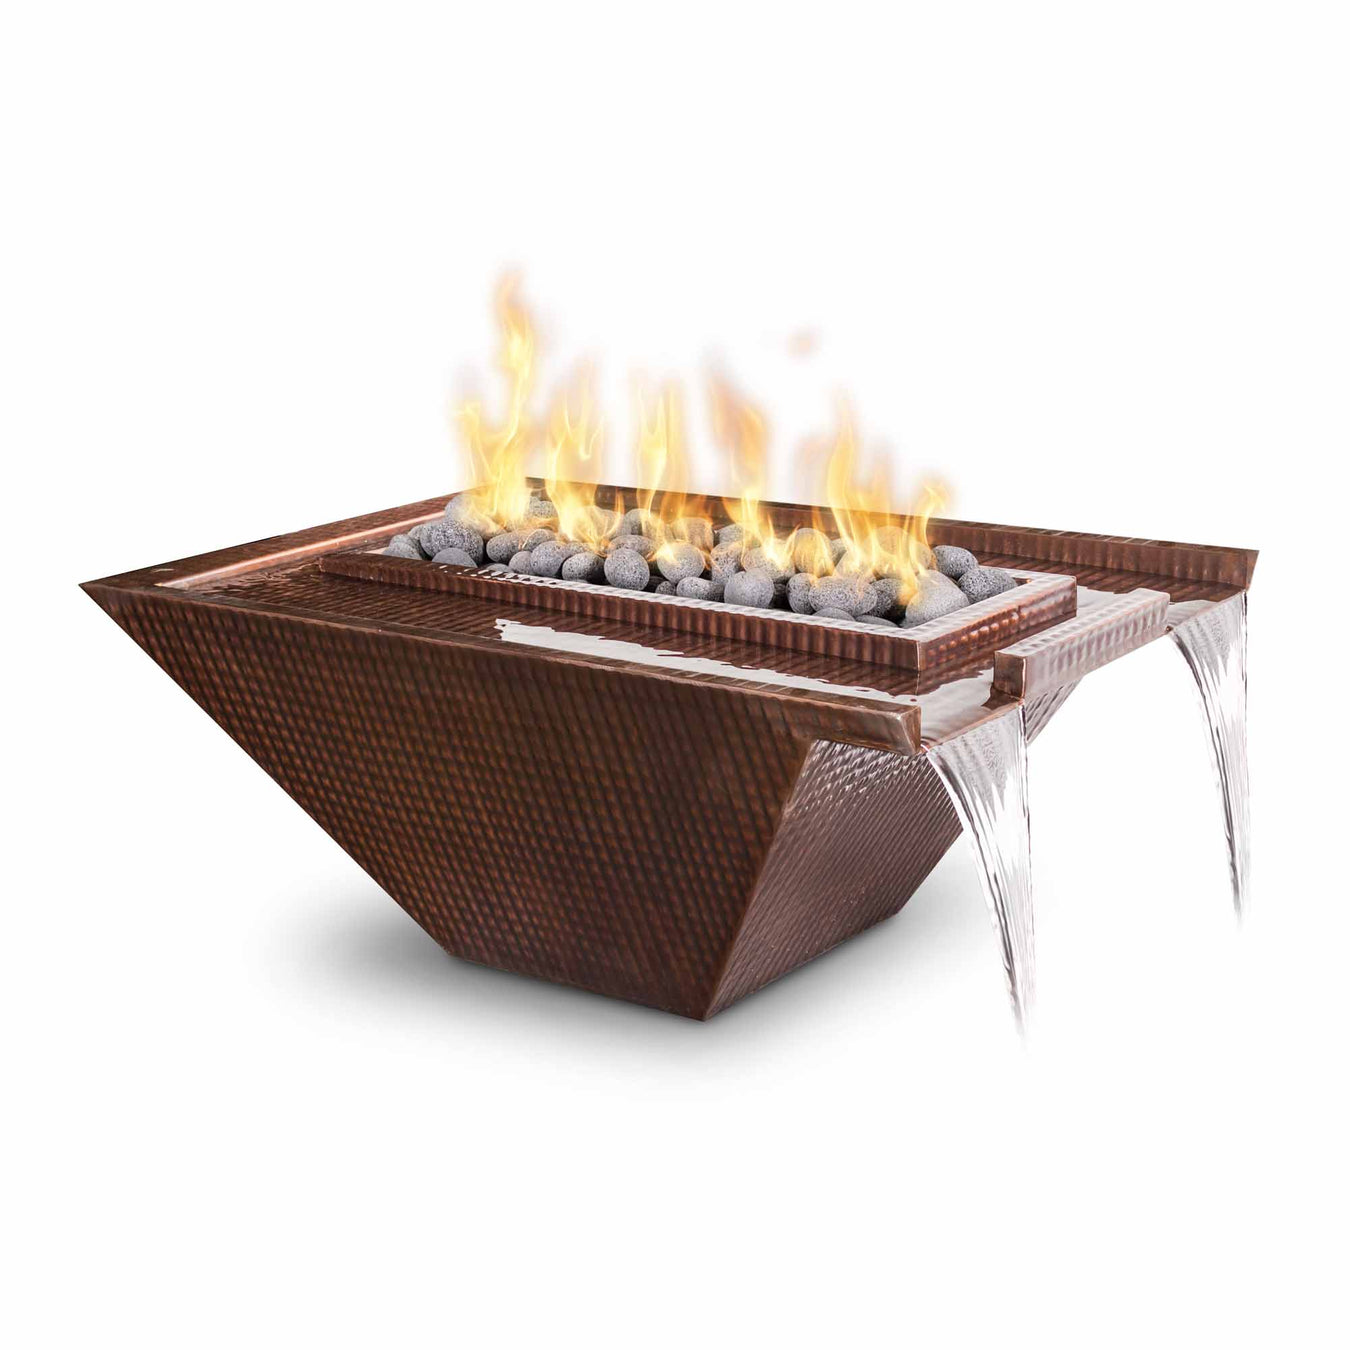 Fire & Water Bowl